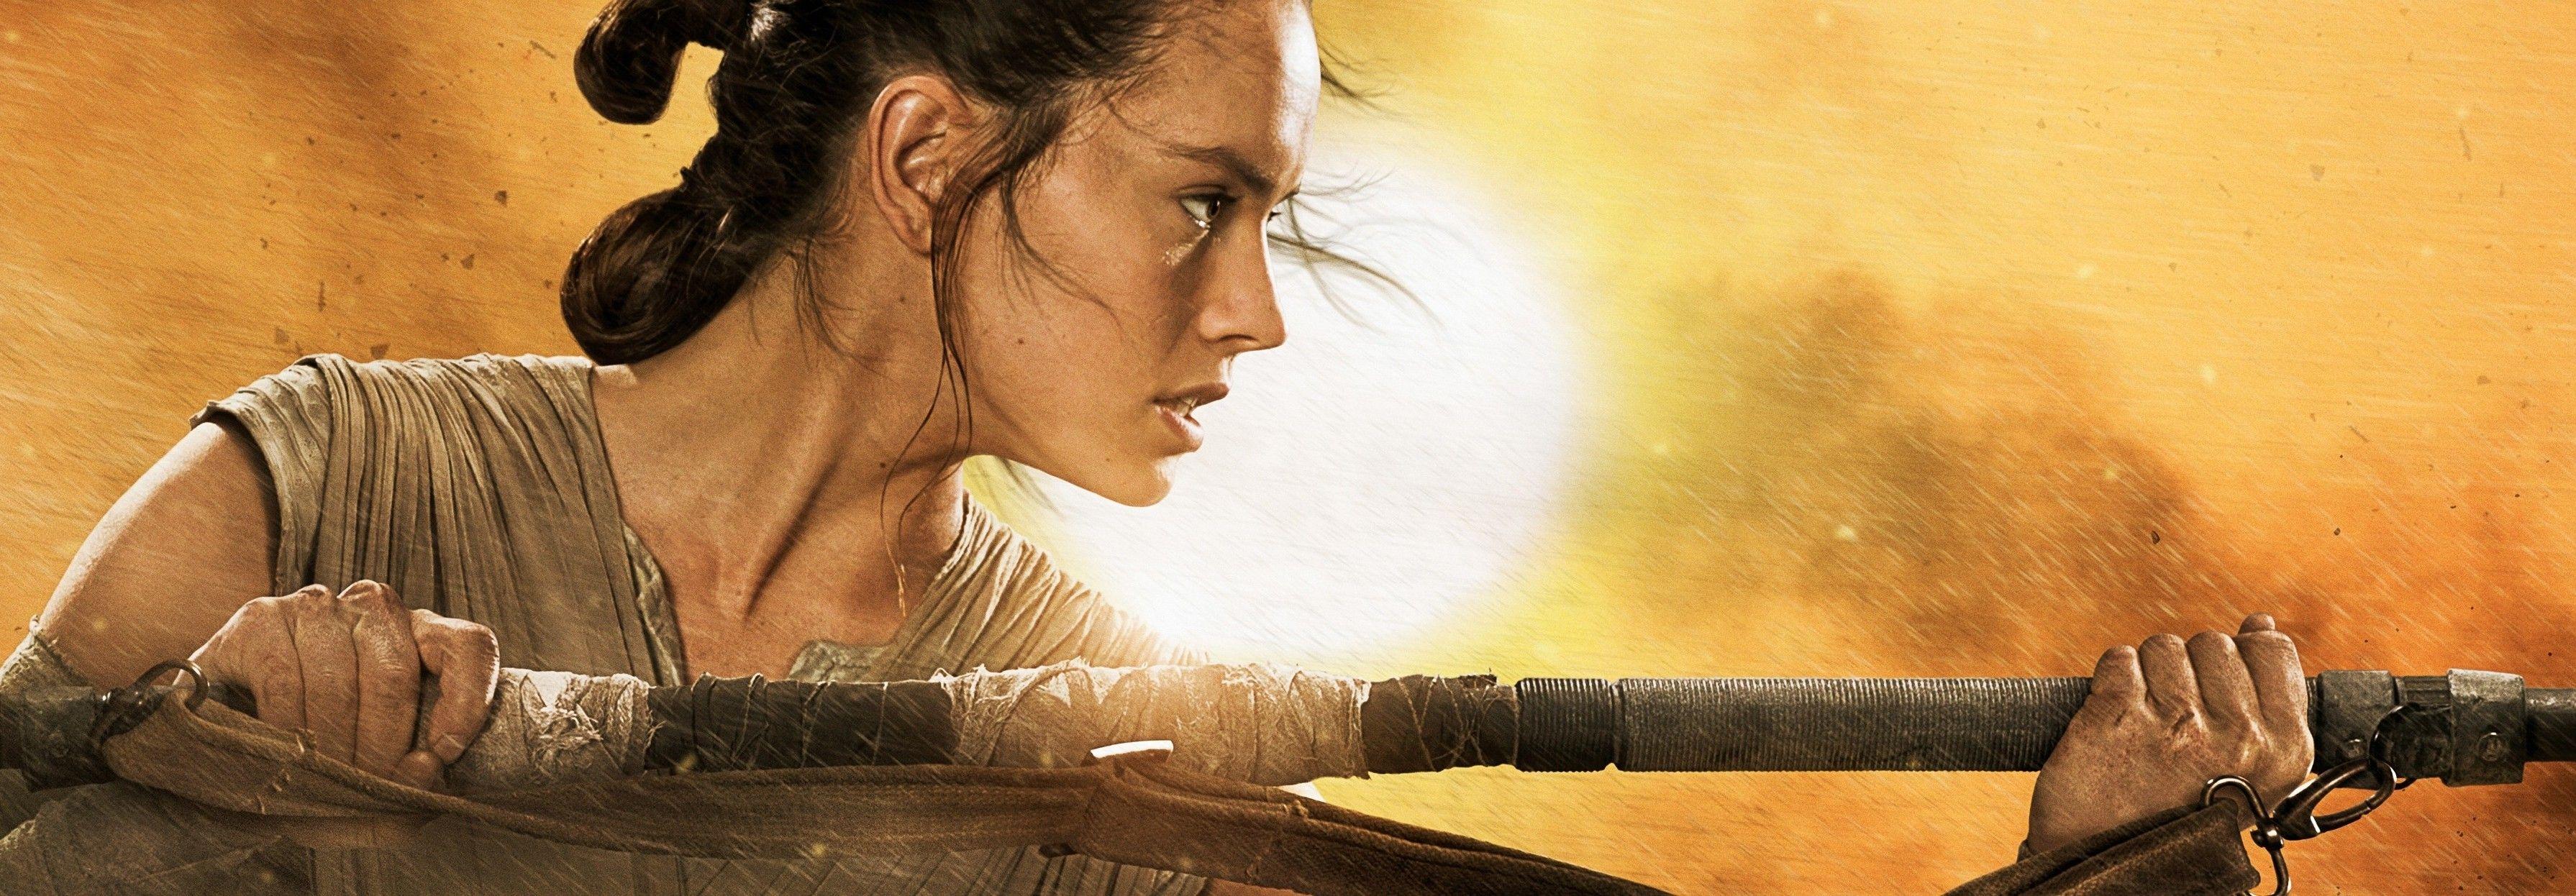 Star Wars: Episode VII The Force Awakens, Movies, Daisy Ridley